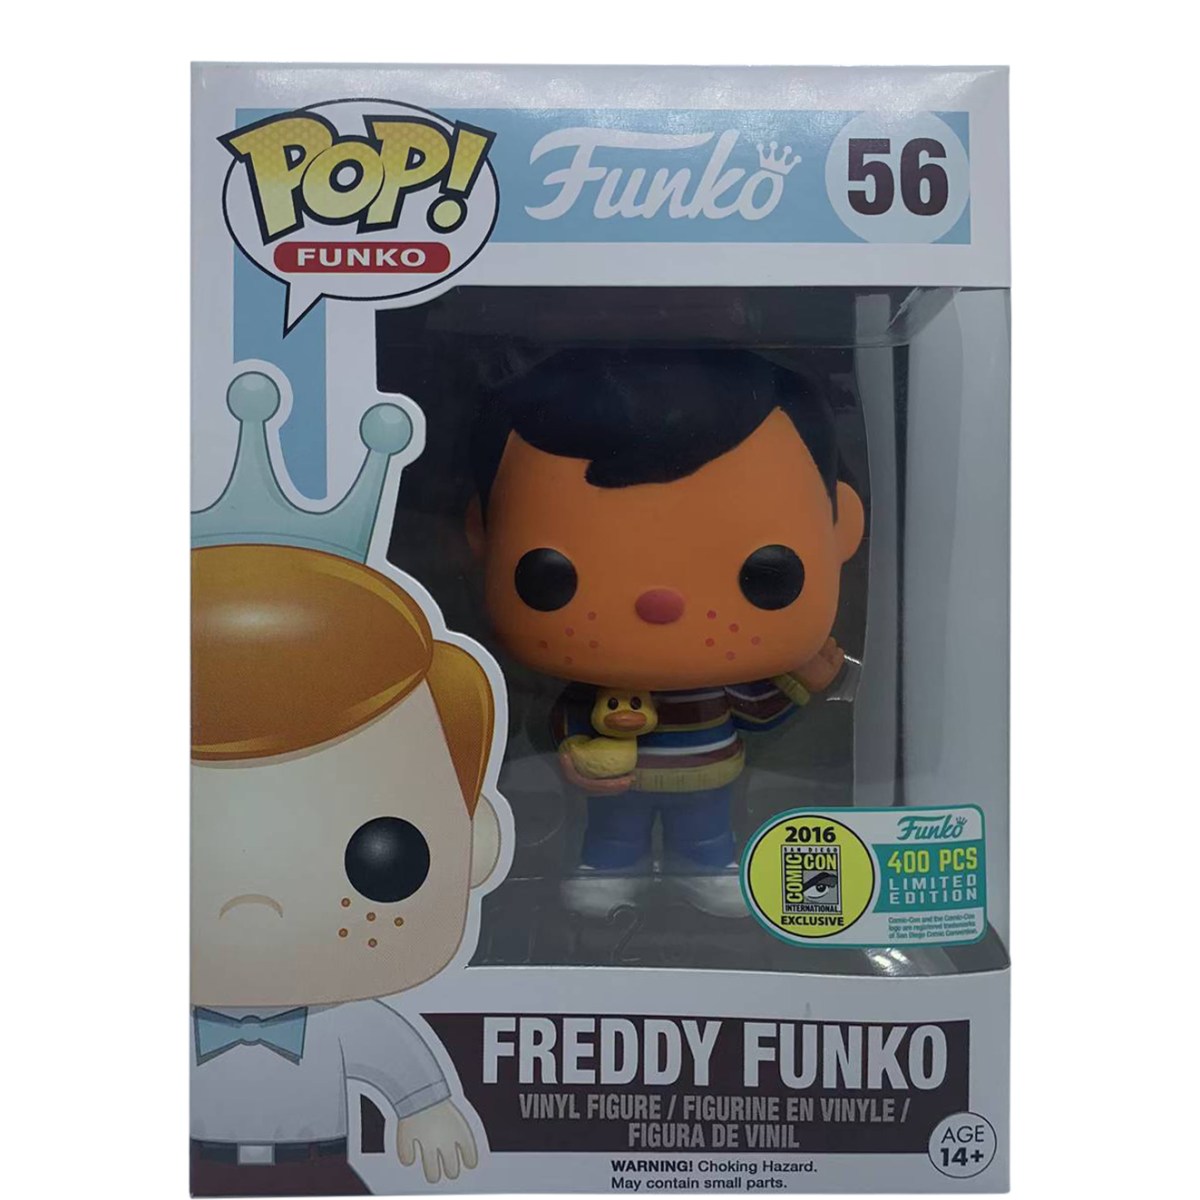 30 Most Expensive Freddy Funko Pops Of All Time - Endless Awesome